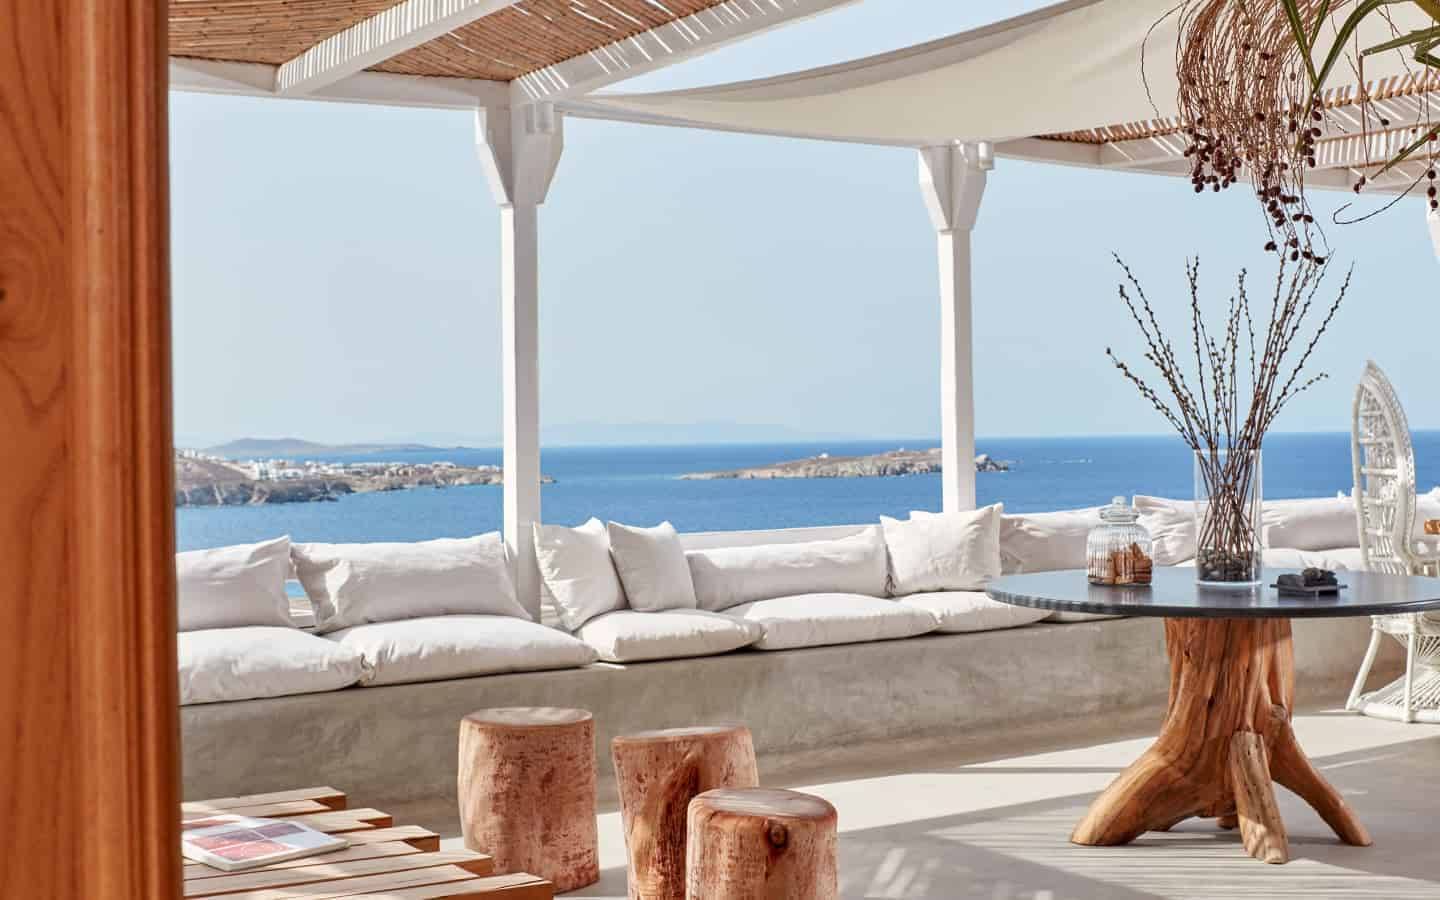 Boheme Mykonos suite covered balcony with plush seating and seaside views